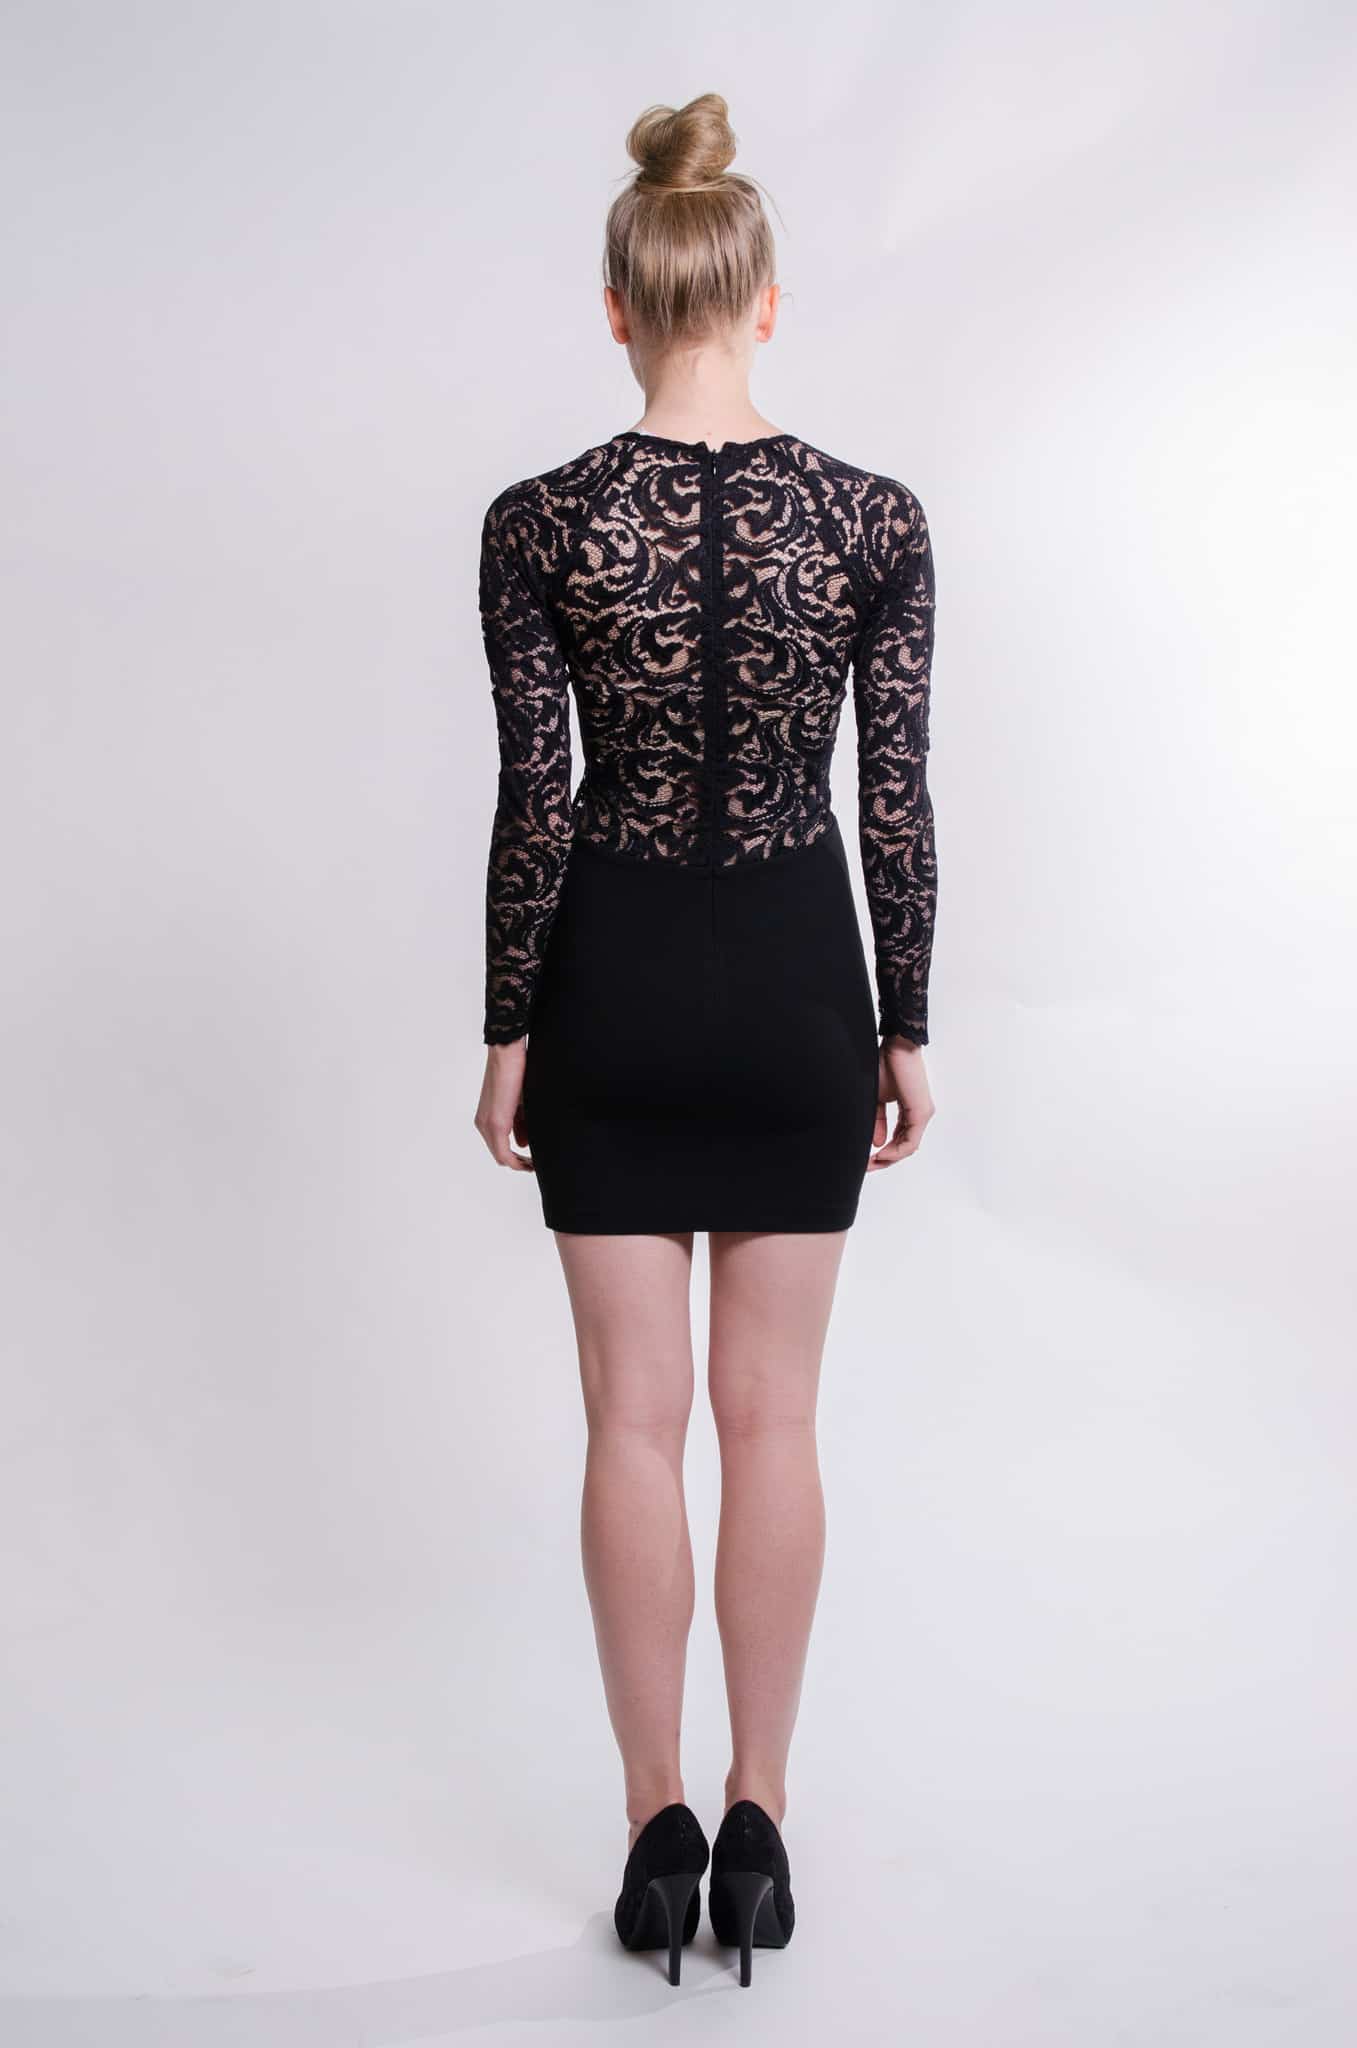 holly-boutique-partydress2-gastown-shopping